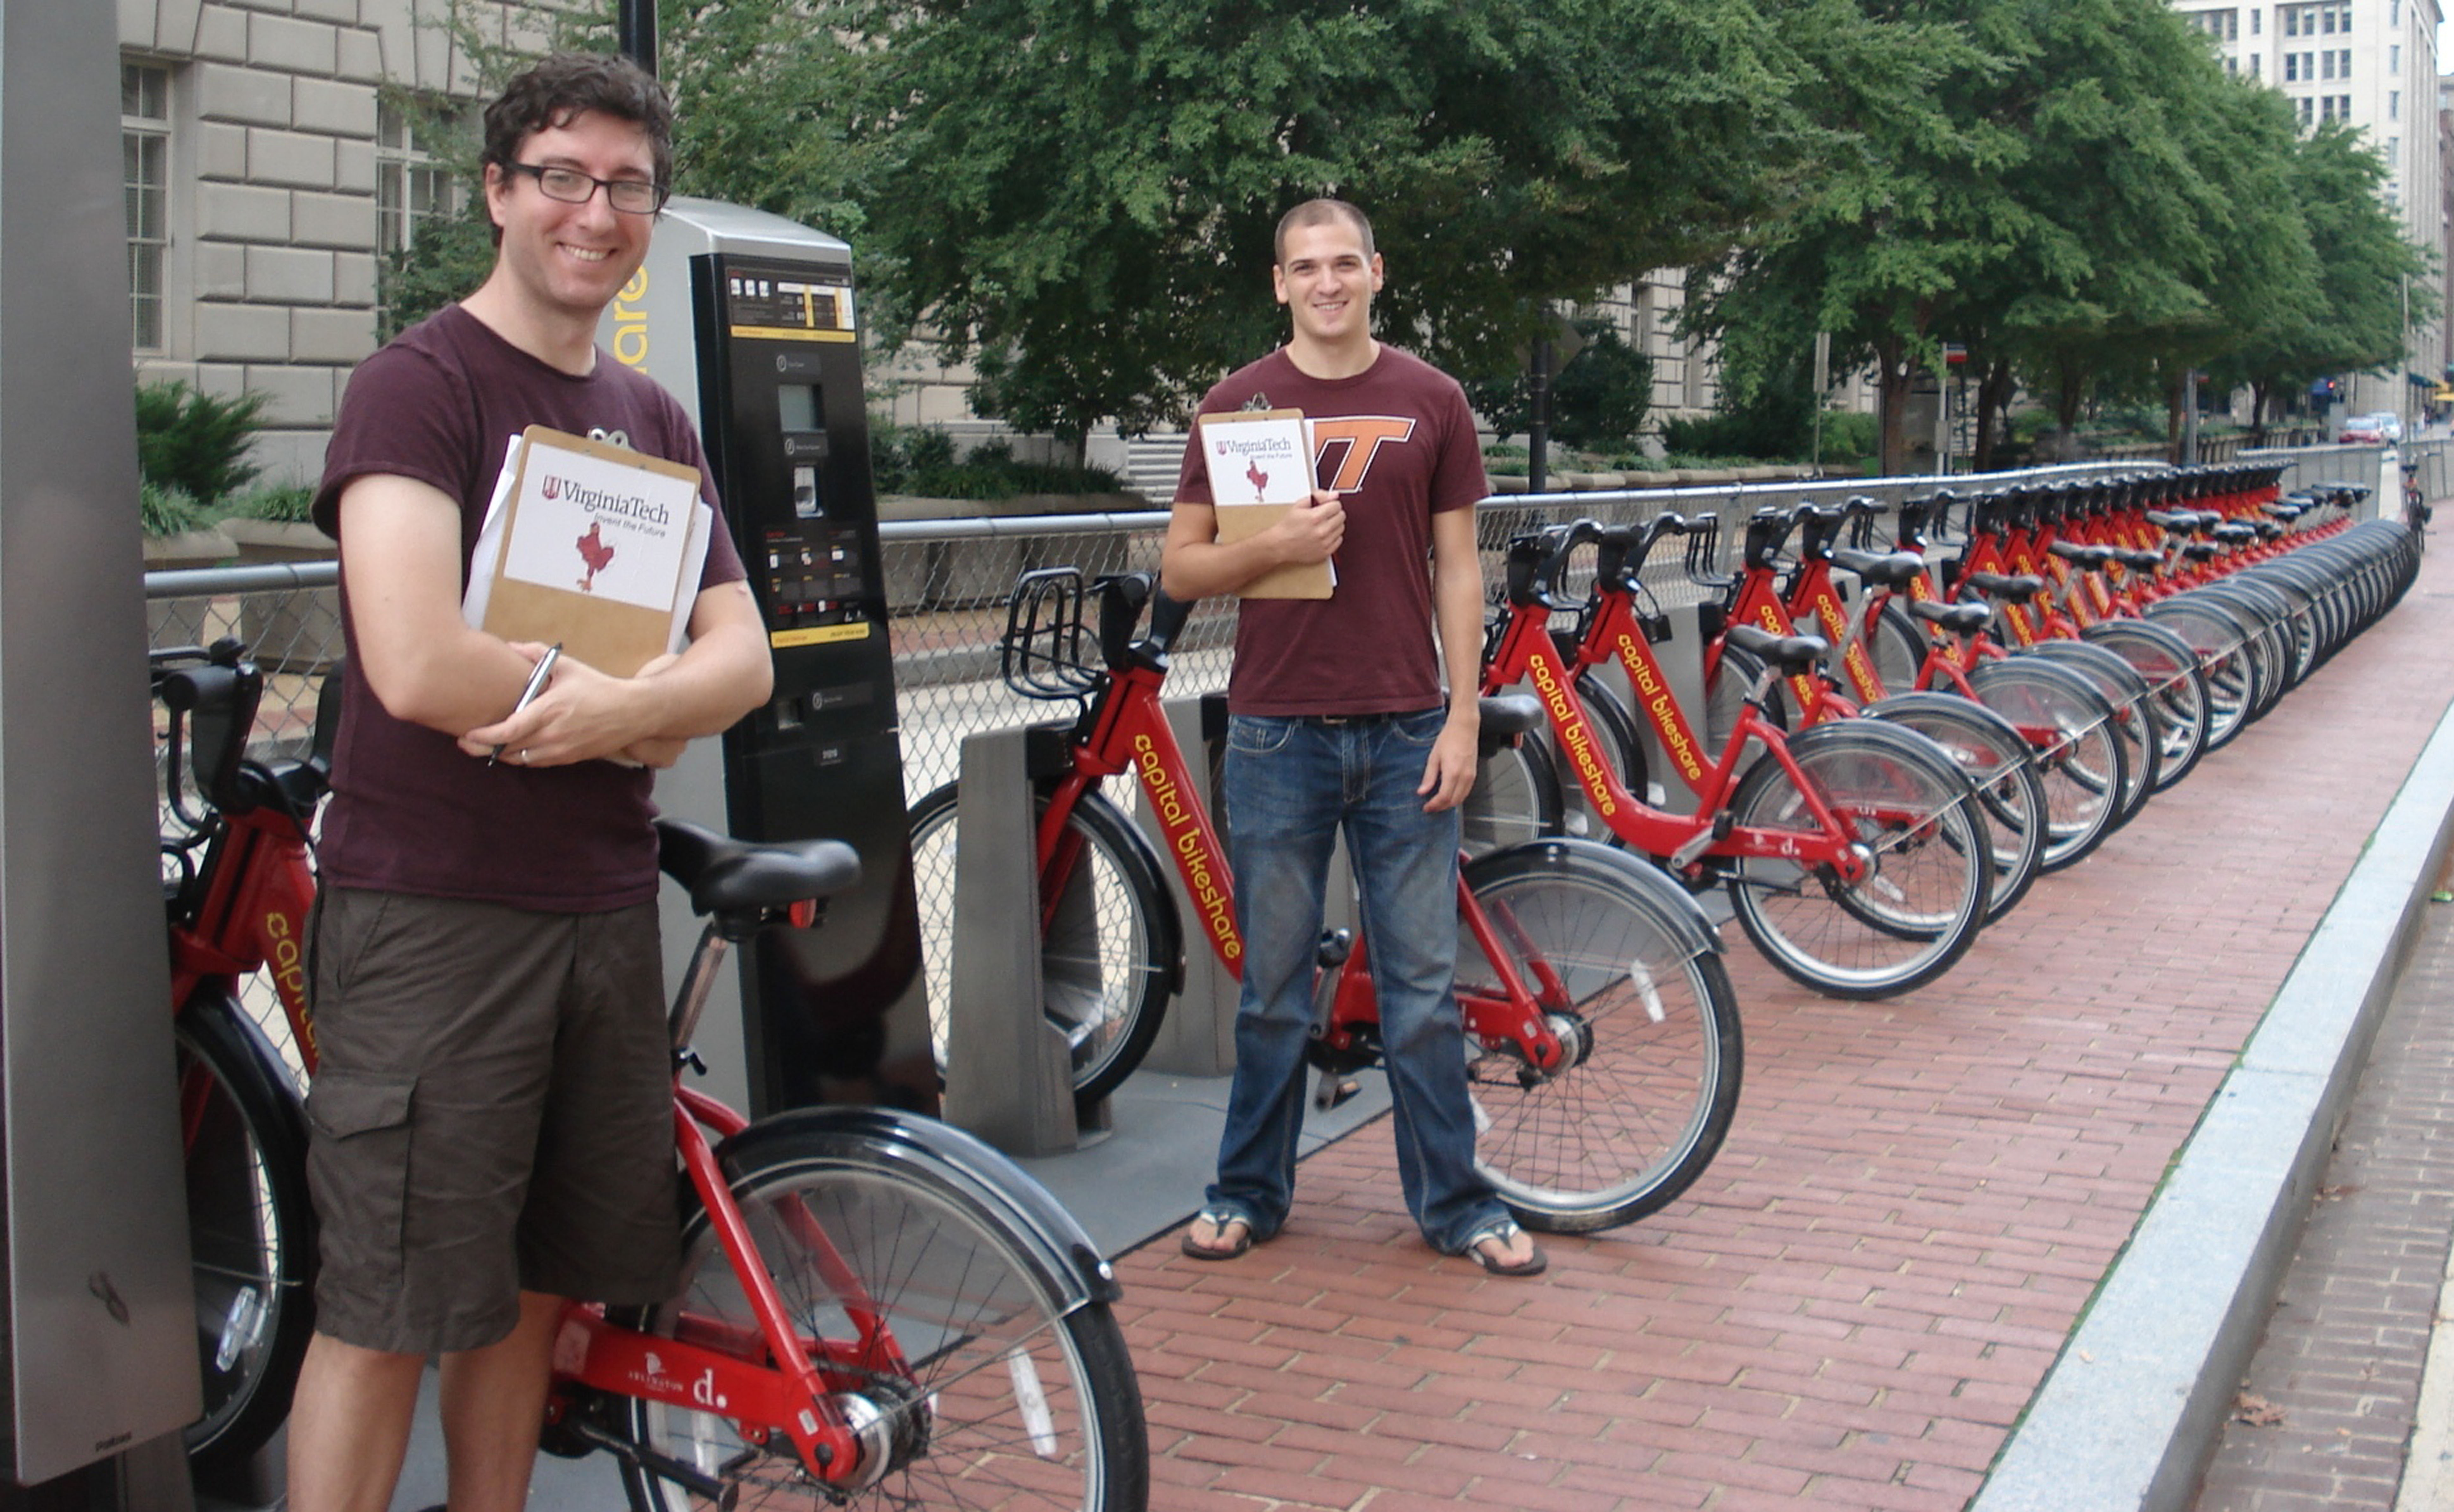 Tim Maher (left) and Austin Watkins (right) stand ready to take surveys at Capital Bikeshare station 